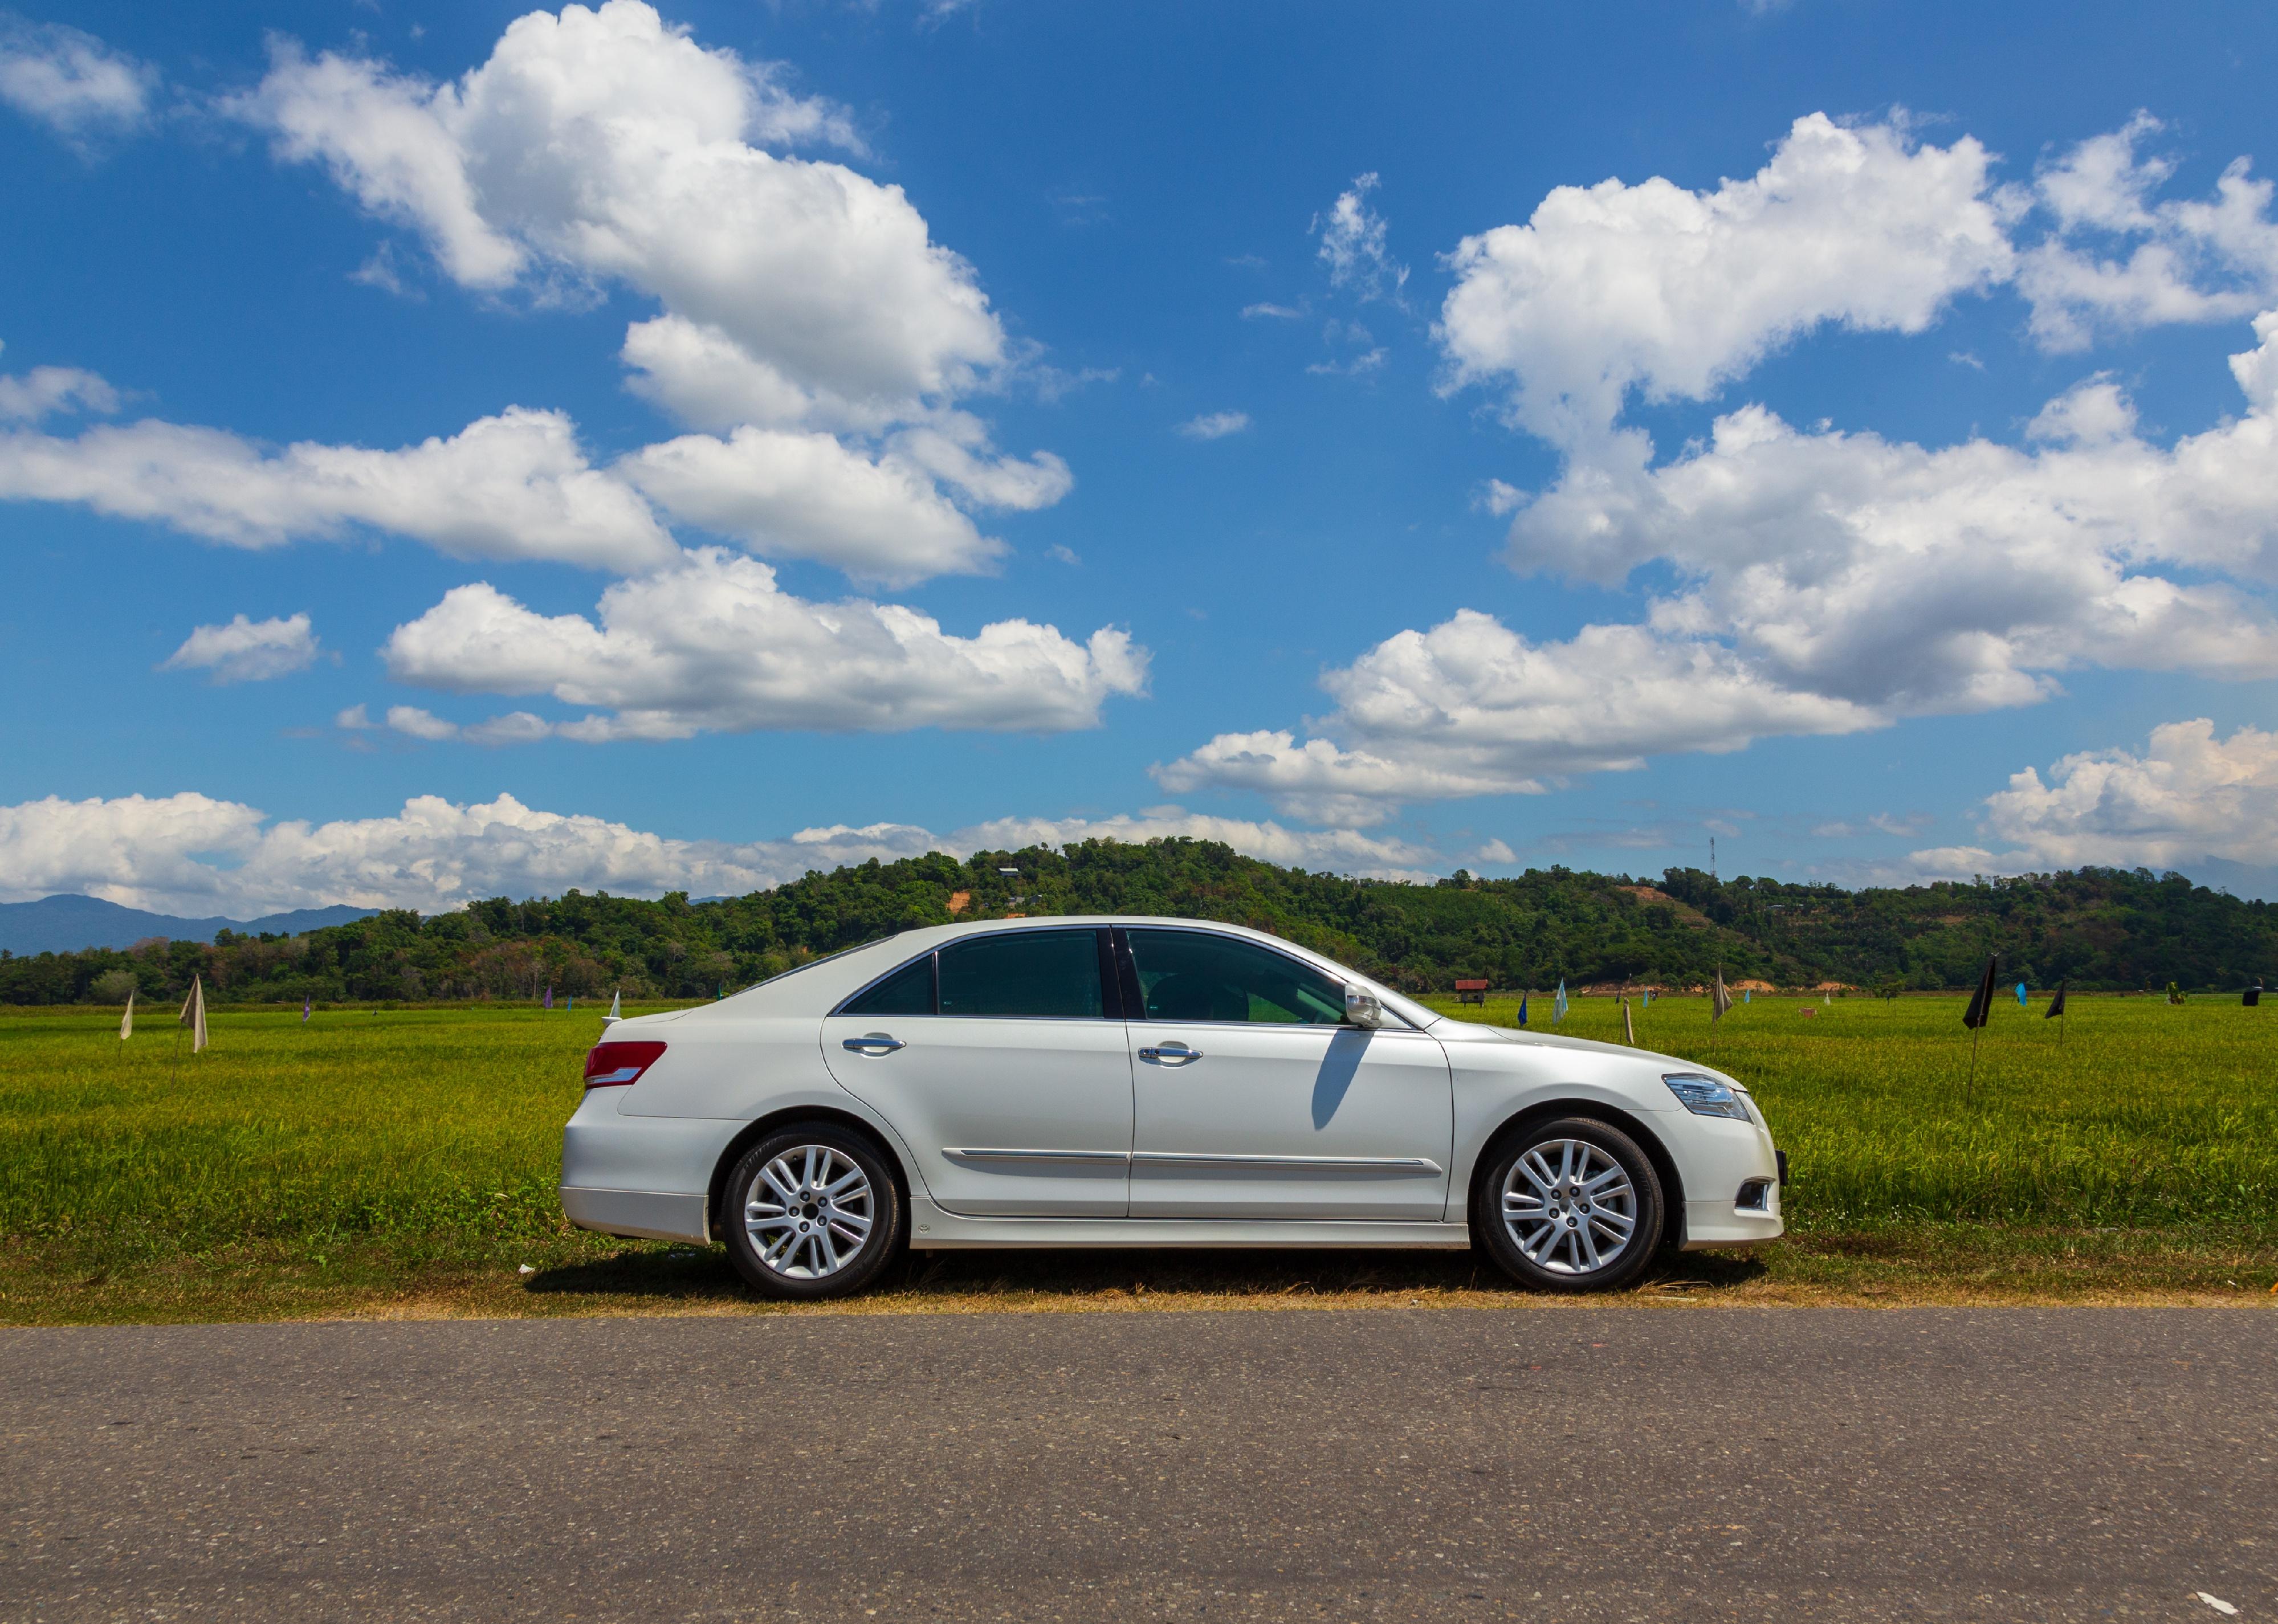 Toyota Camry with beautiful white cloud and blue sky landscape view